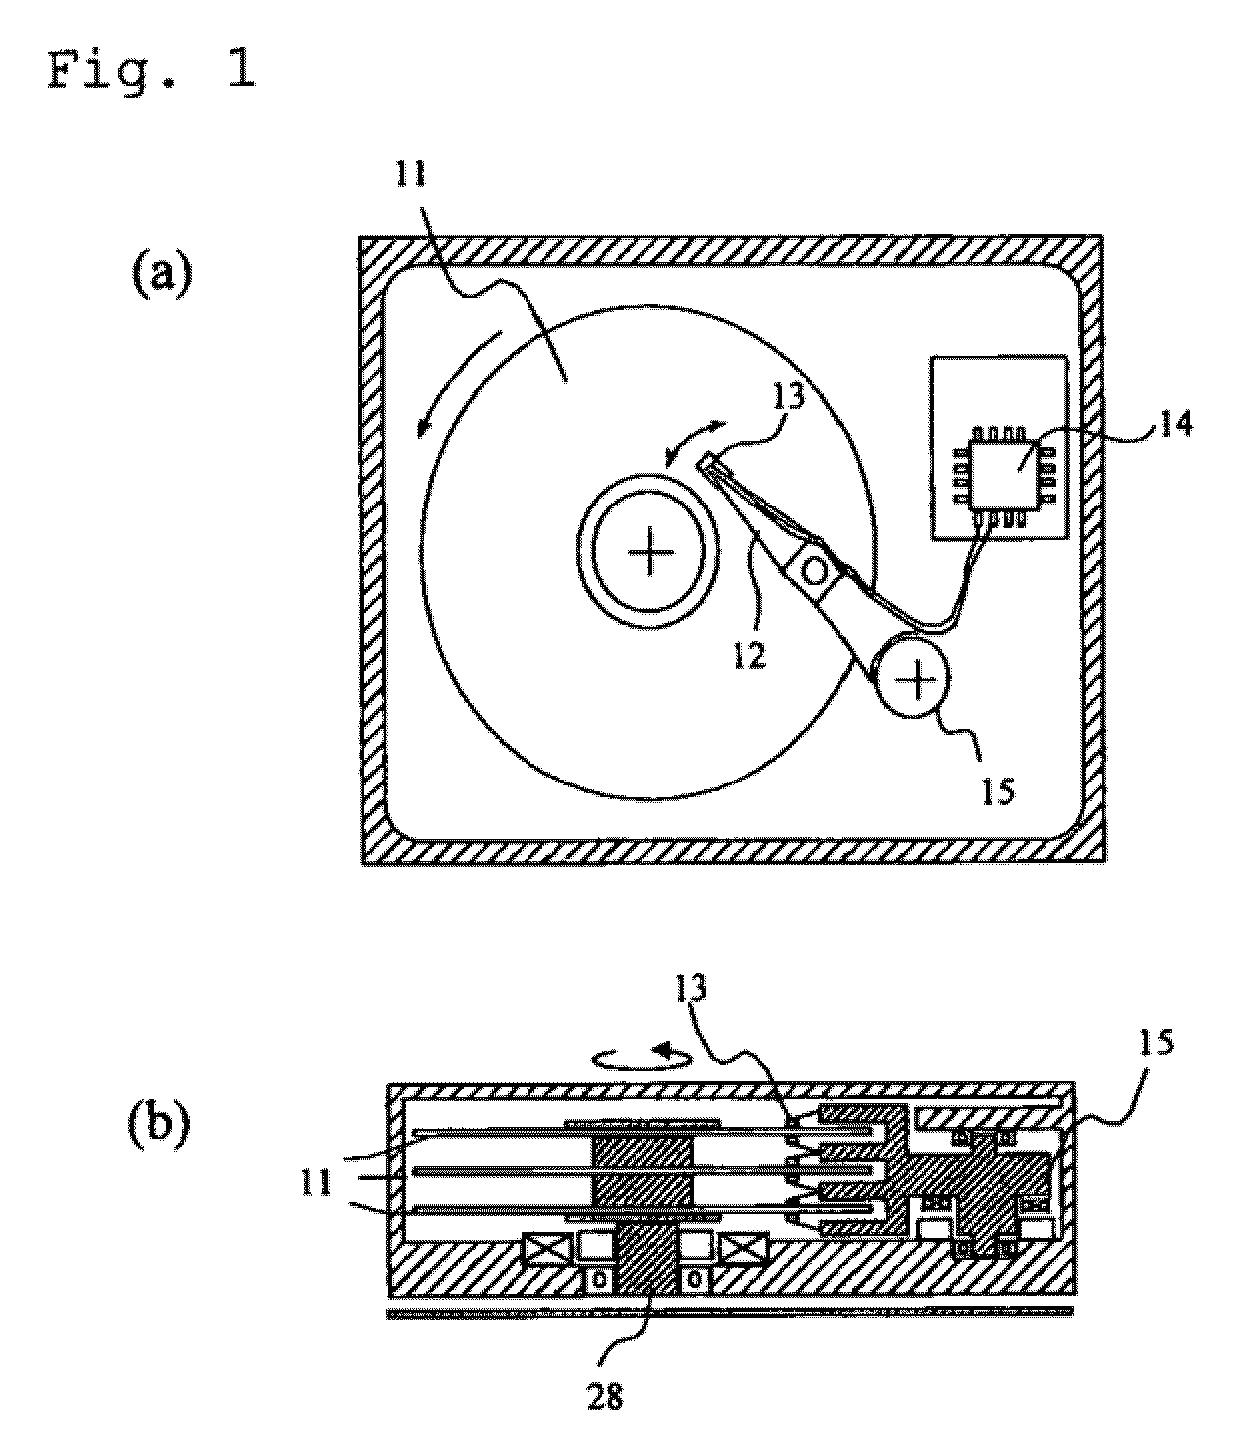 Magnetic recording head, method of manufacturing the same, and magnetic recording/reproducing device